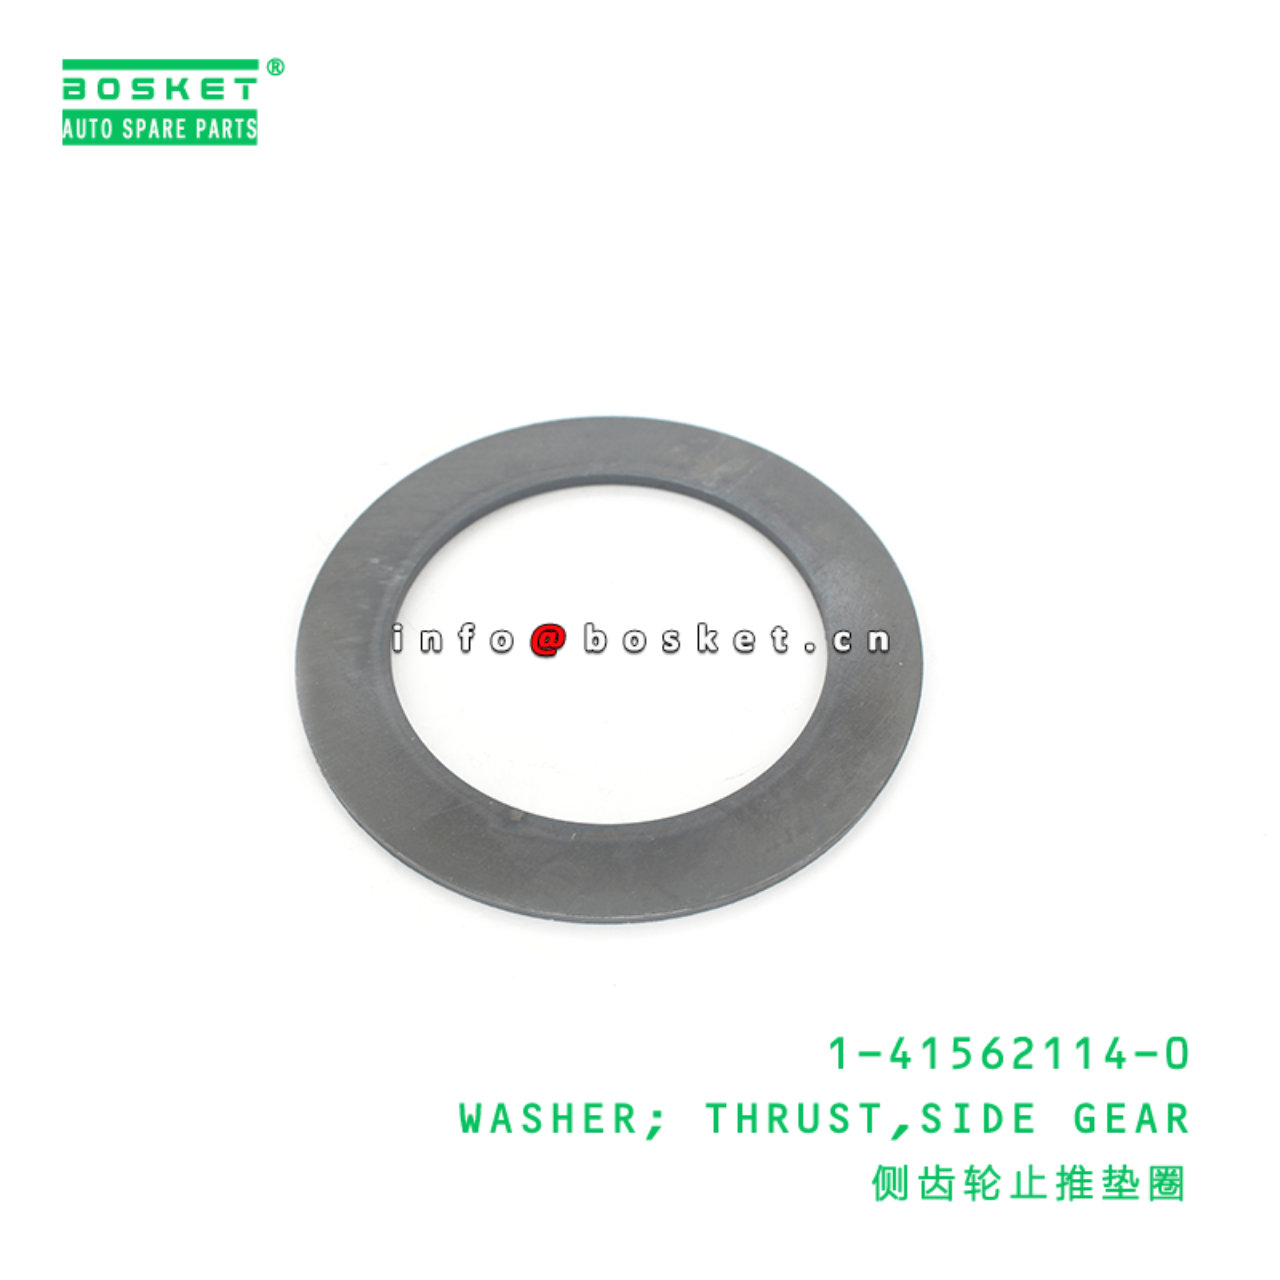 1-41562114-0 Side Gear Thrust Washer 1415621140 Suitable for ISUZU VC46